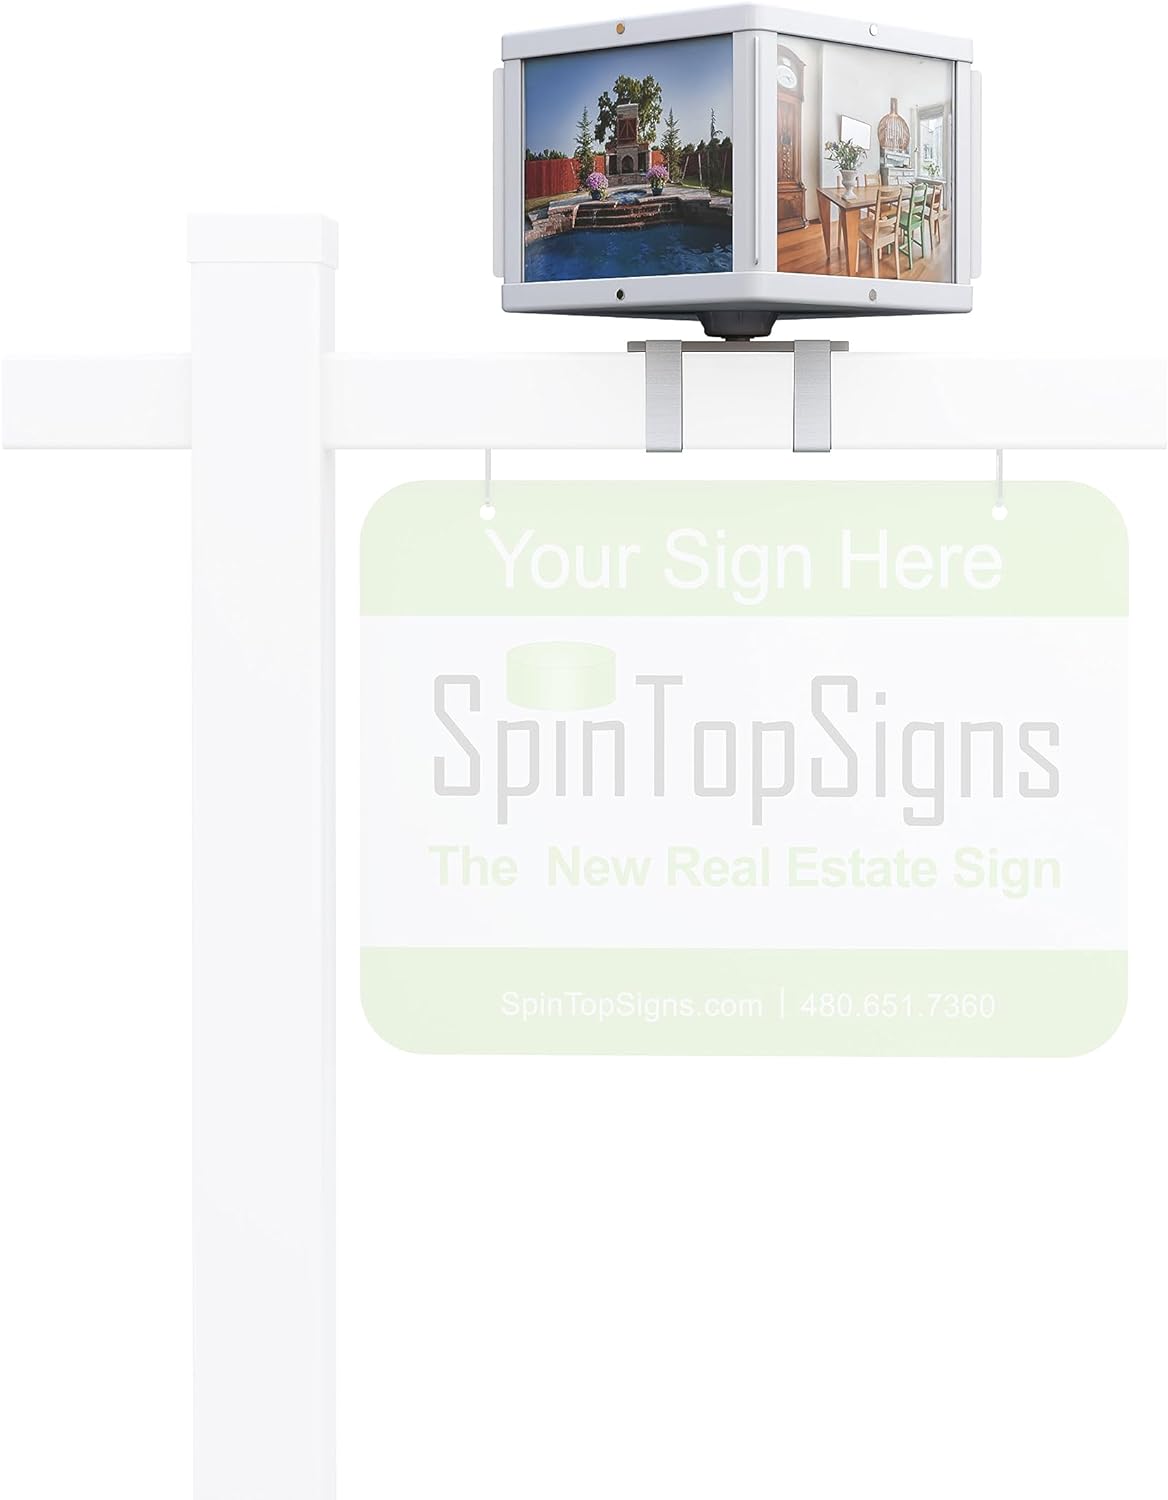 SpinTopSign Square Spinning Real Estate Sign, Holds Pictures, Ideal for Open House Signs for Real Estate, Retail Stores Great for Real Estate Agents and Business Owners